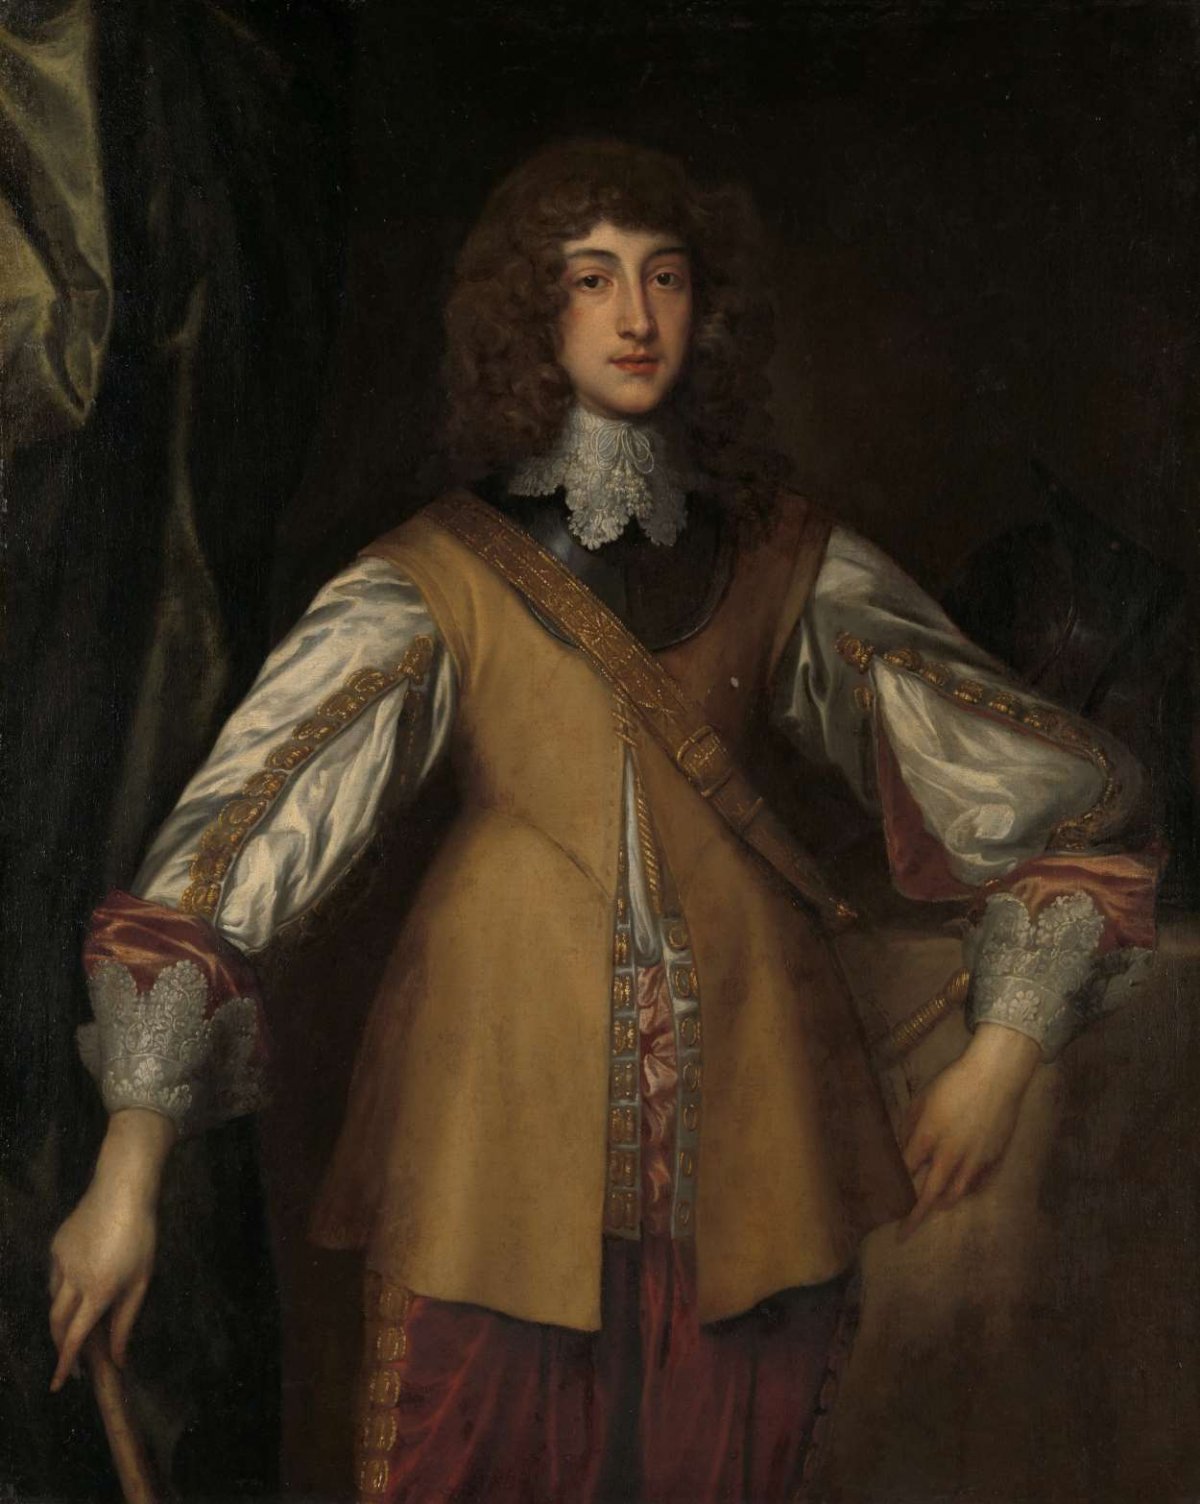 Portrait of Rupert (1619-1682), Prince-Palatine of the Rhine, in Combat Dress, Anthony van Dyck, after c. 1645